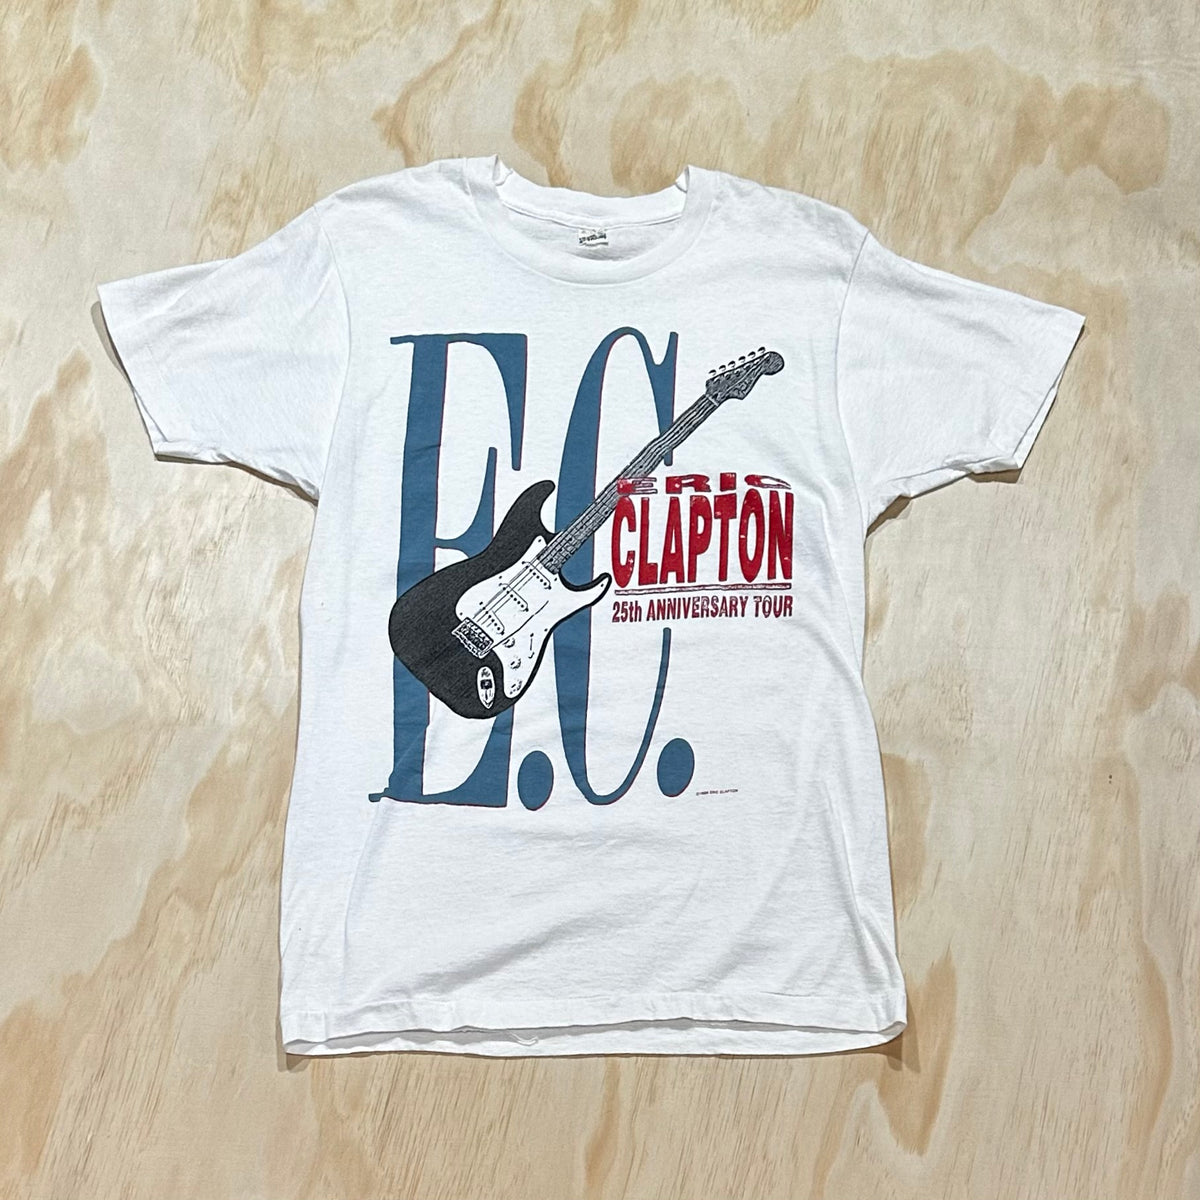 Vintage 80s Eric Clapton 25th Anniversary T-Shirt from 1988